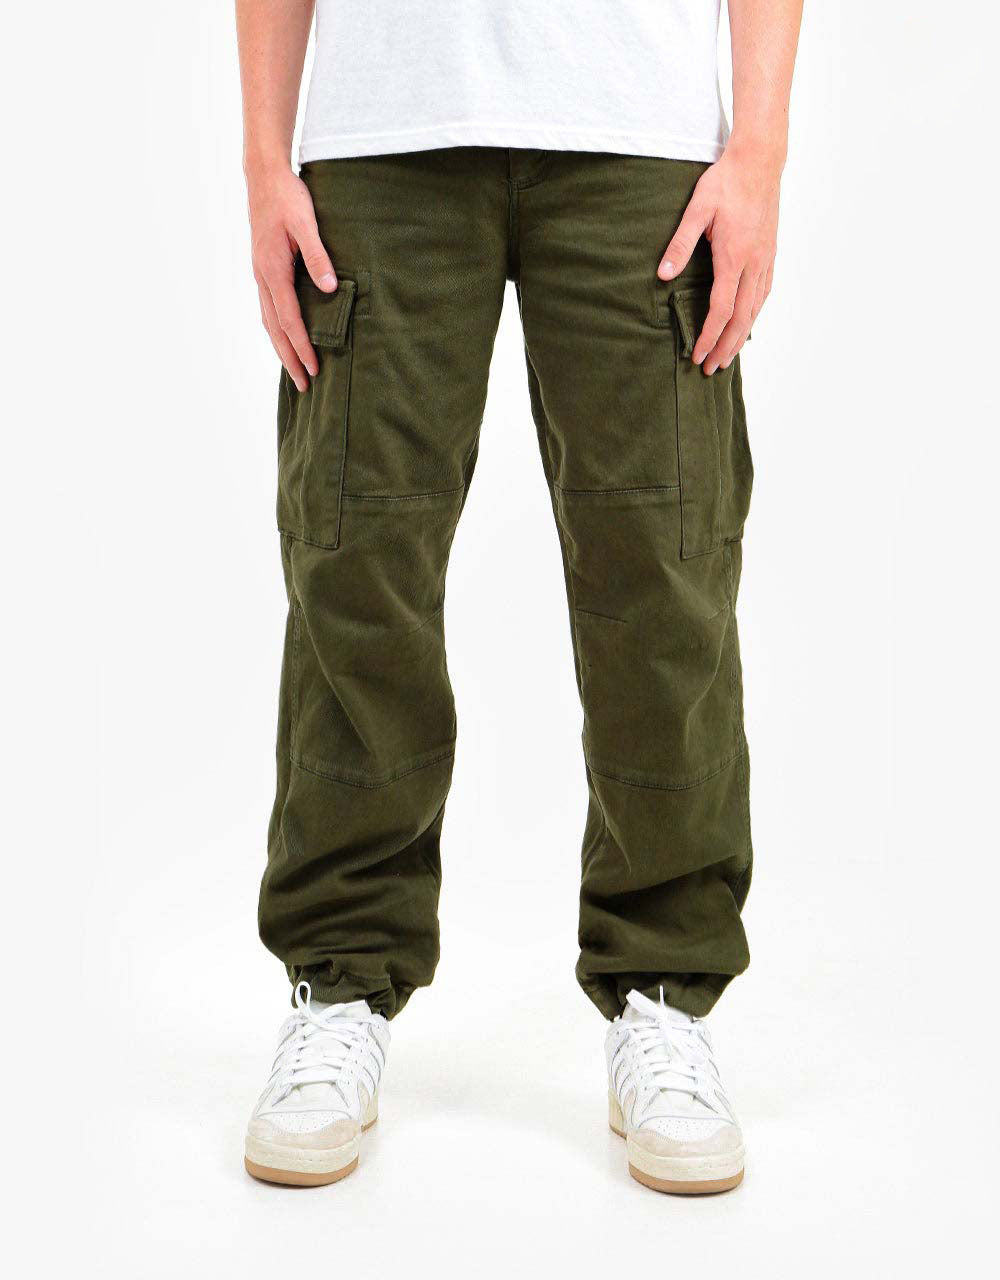 Mens - Organic Cotton Baggy Cargo Pants in Drab Olive Green | Superdry UK